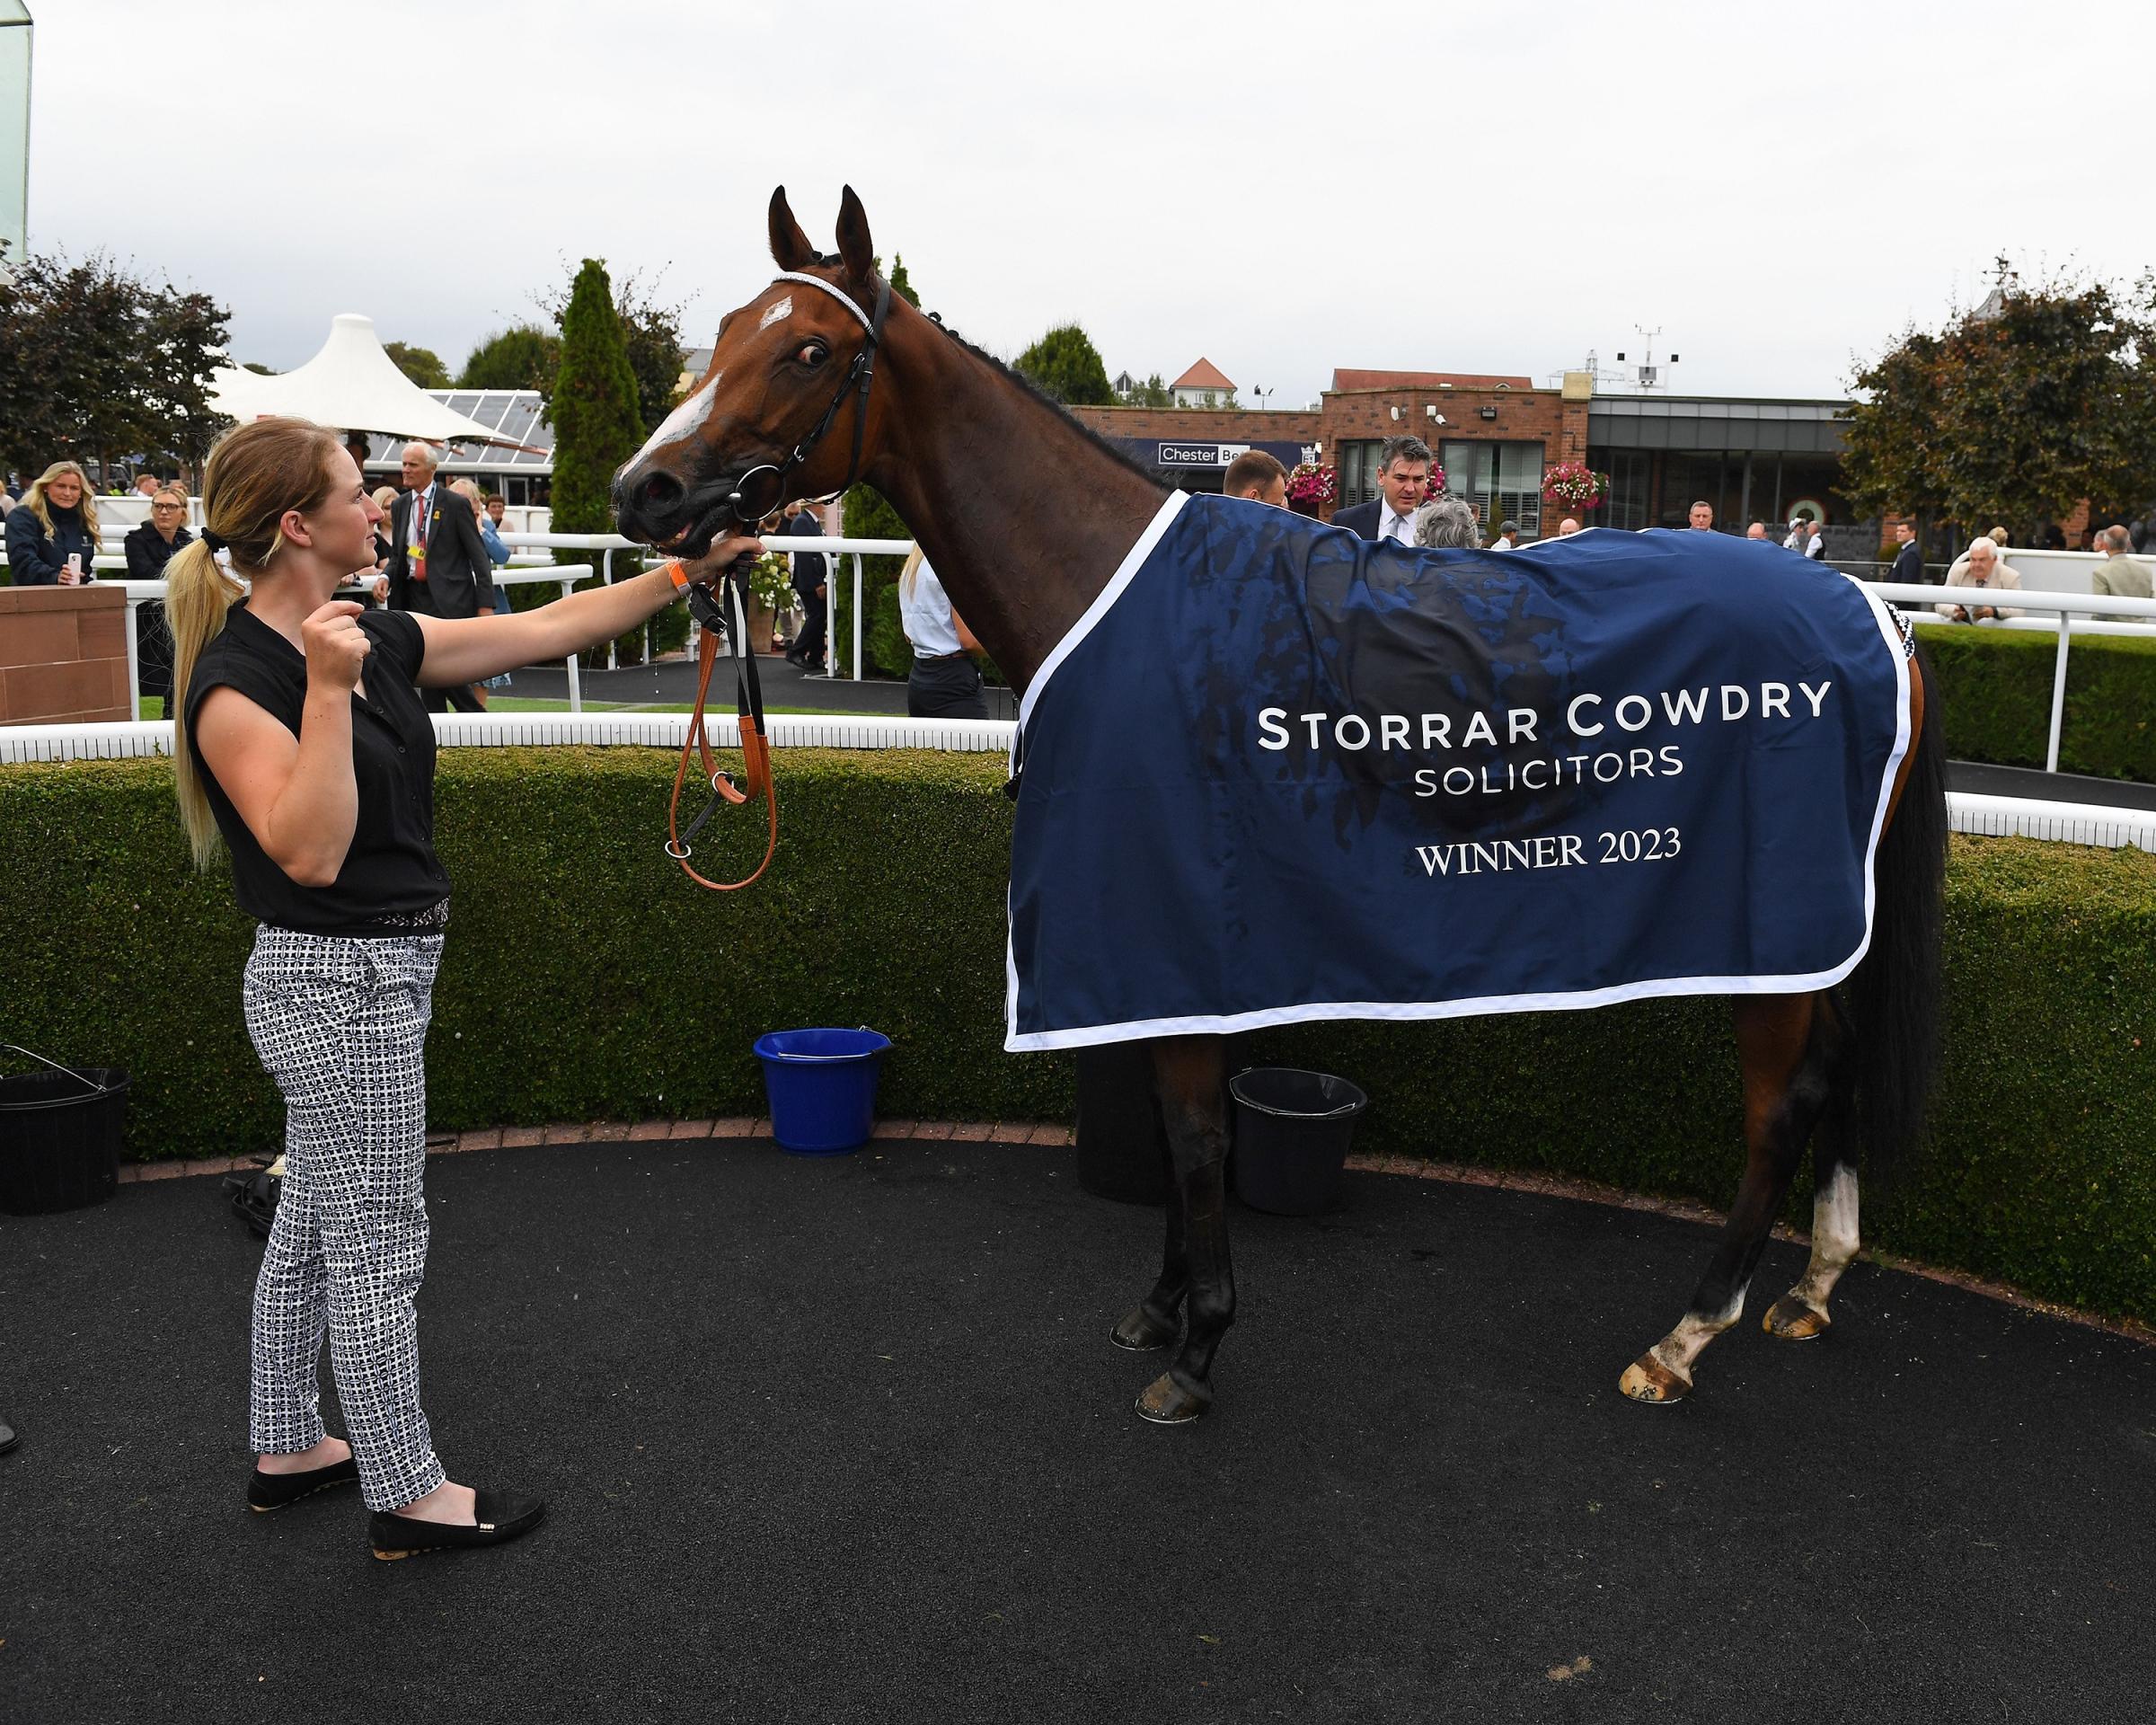 Storrar Cowdry celebrated its 40th anniversary at Chester Races.